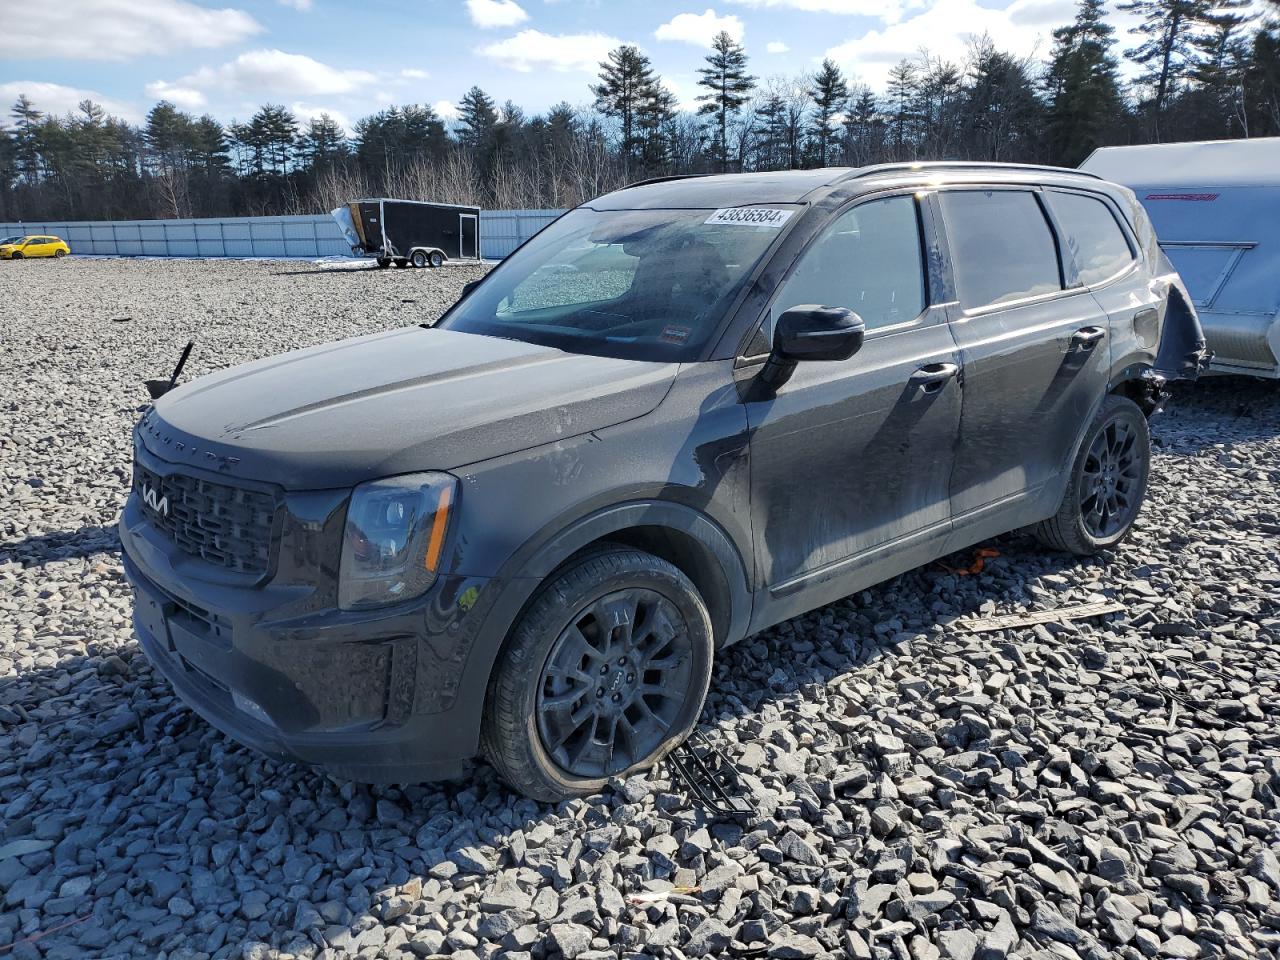 vin: 5XYP5DHC4NG293389 5XYP5DHC4NG293389 2022 kia telluride 3800 for Sale in 04062, Me - Windham, Windham, USA